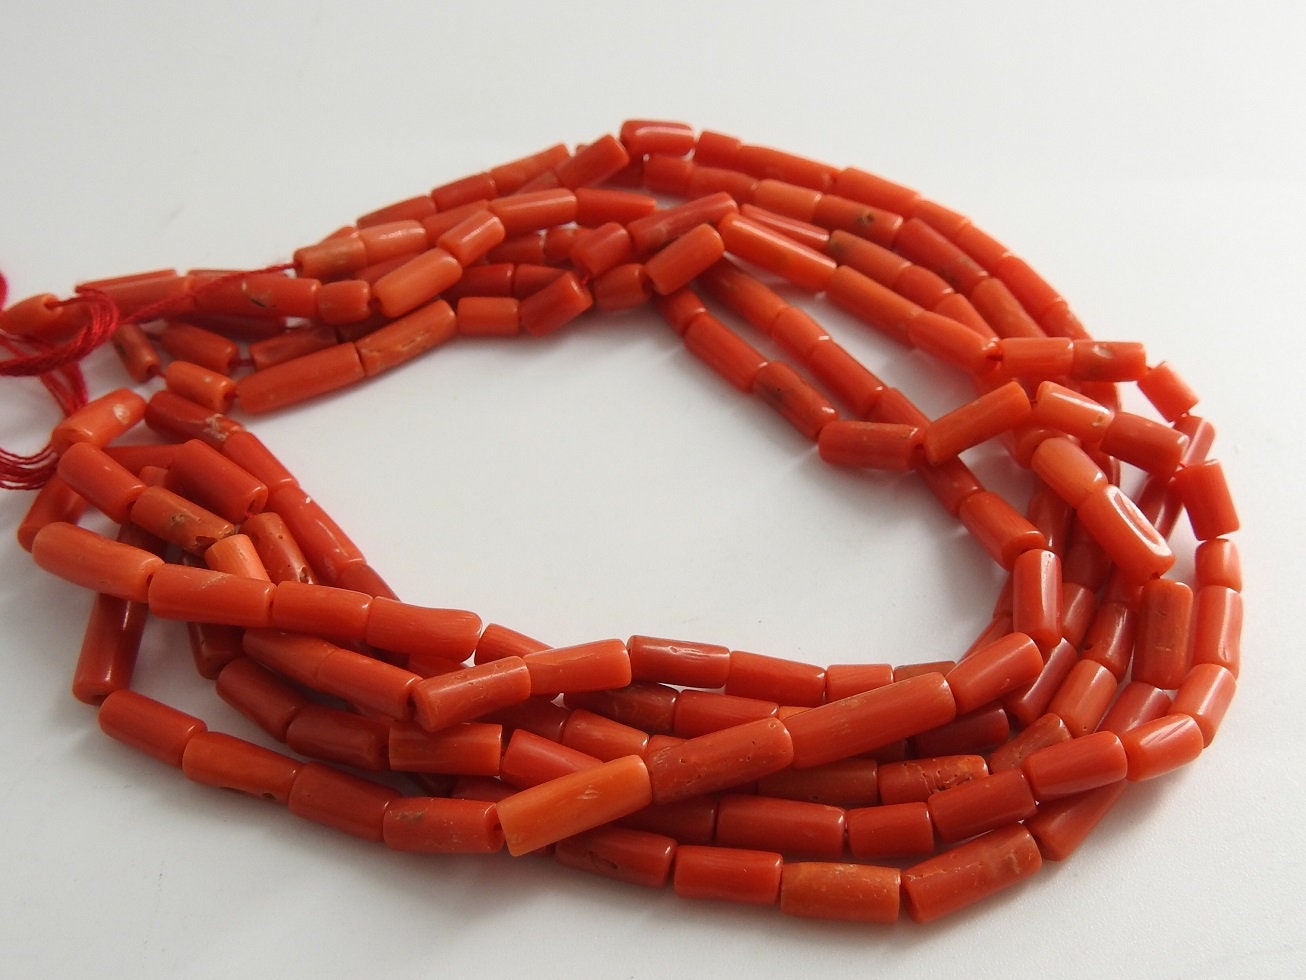 100%Natural Red Coral Smooth Tubes,Drum,Cylinder,Handmade,Bead,Loose Stone,For Making Jewelry Wholesaler Supplies BK(CR2) | Save 33% - Rajasthan Living 14